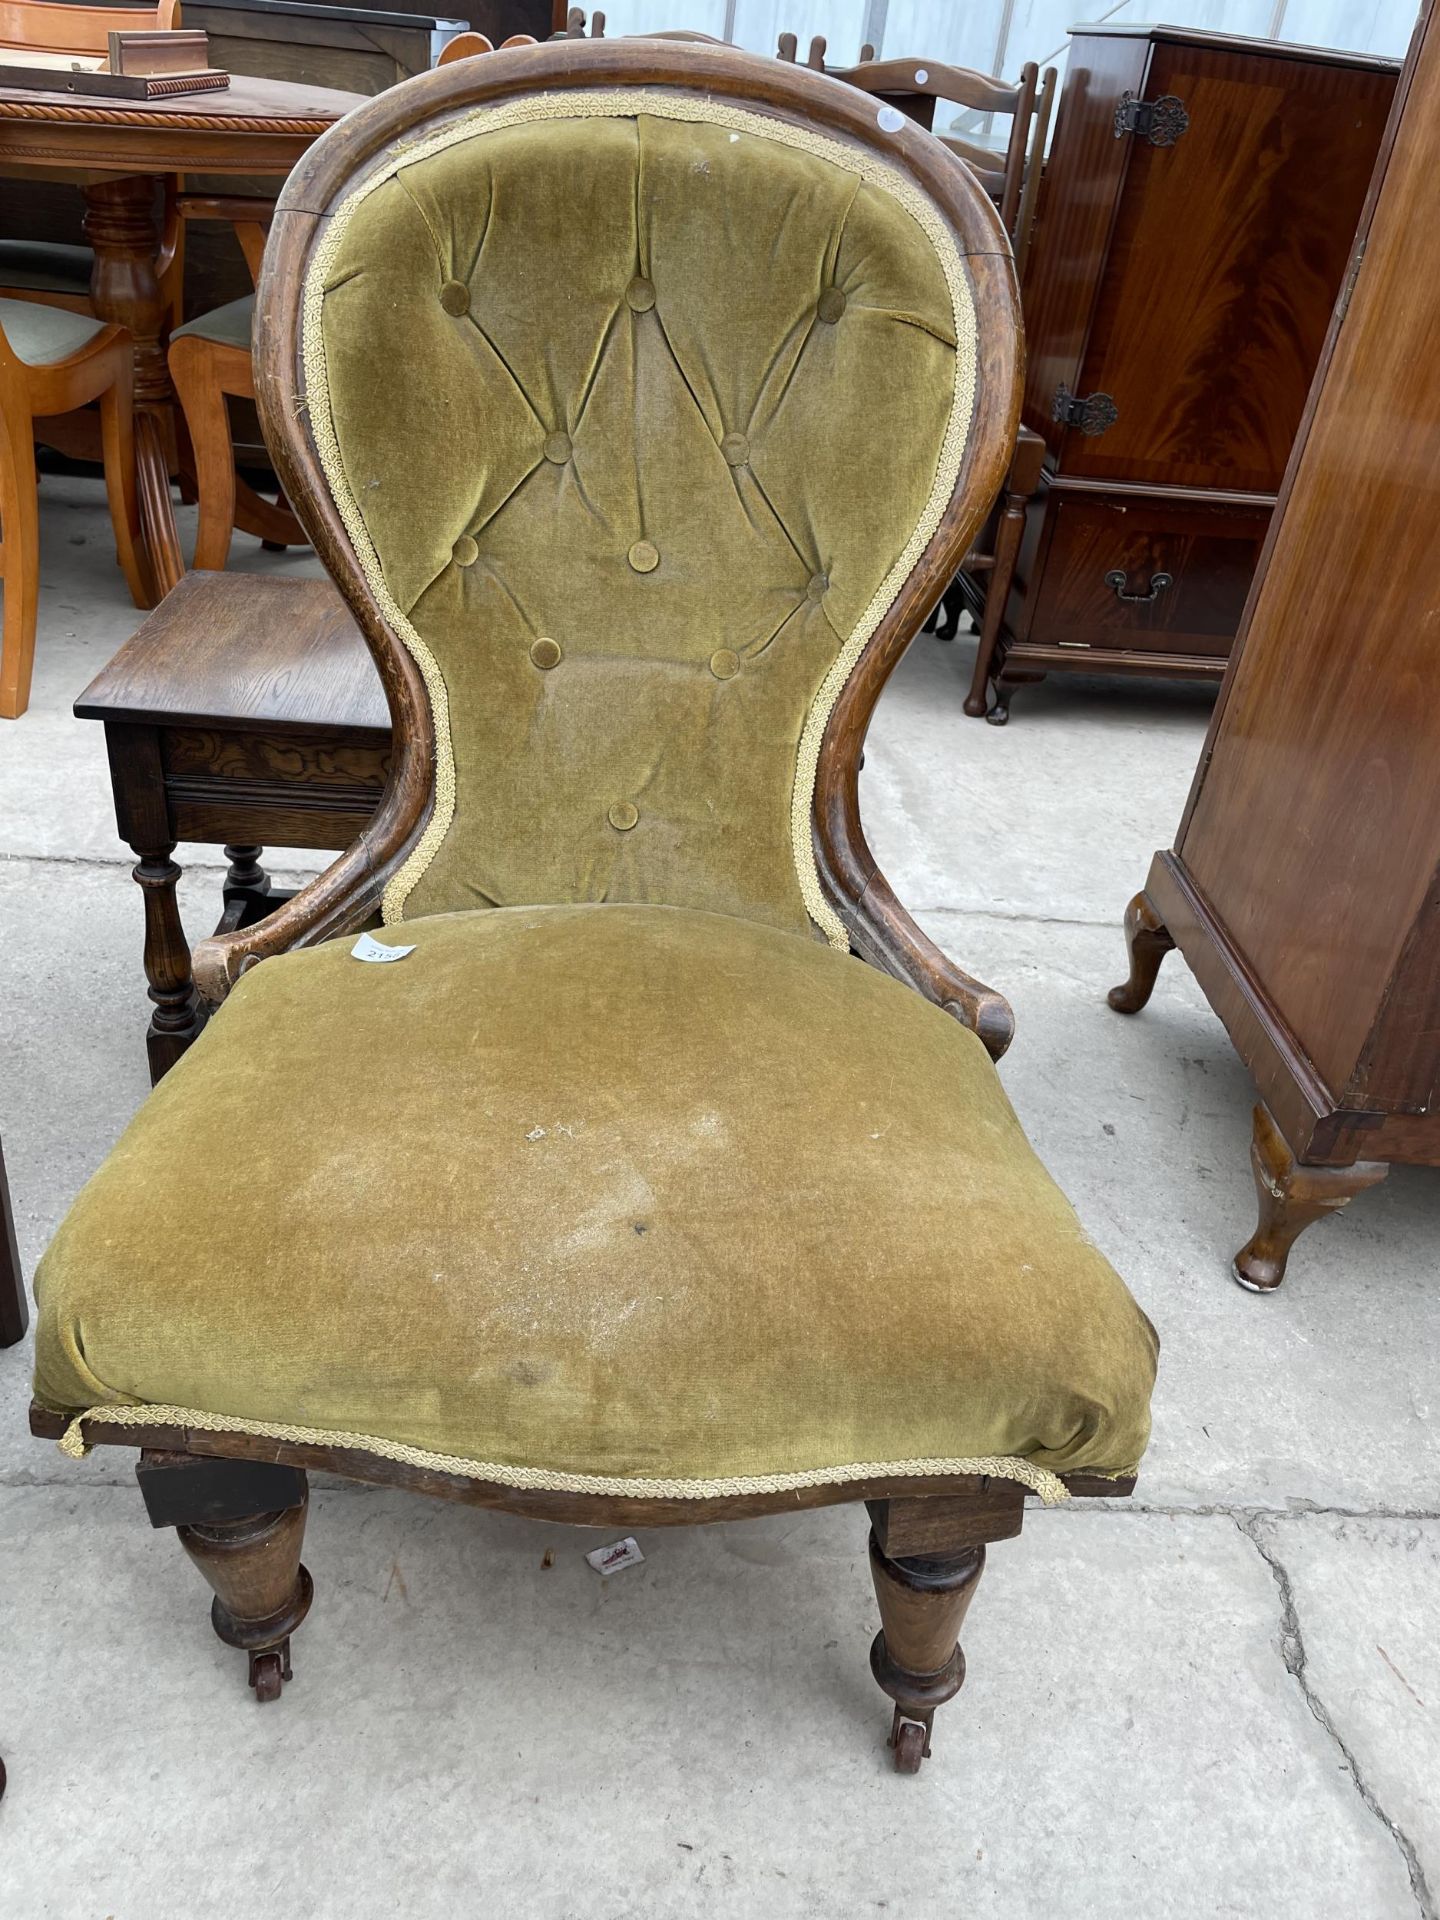 A VICTORIAN STYLE SPOON BACK CHAIR (FRONT LEGS NOT ATTACHED)